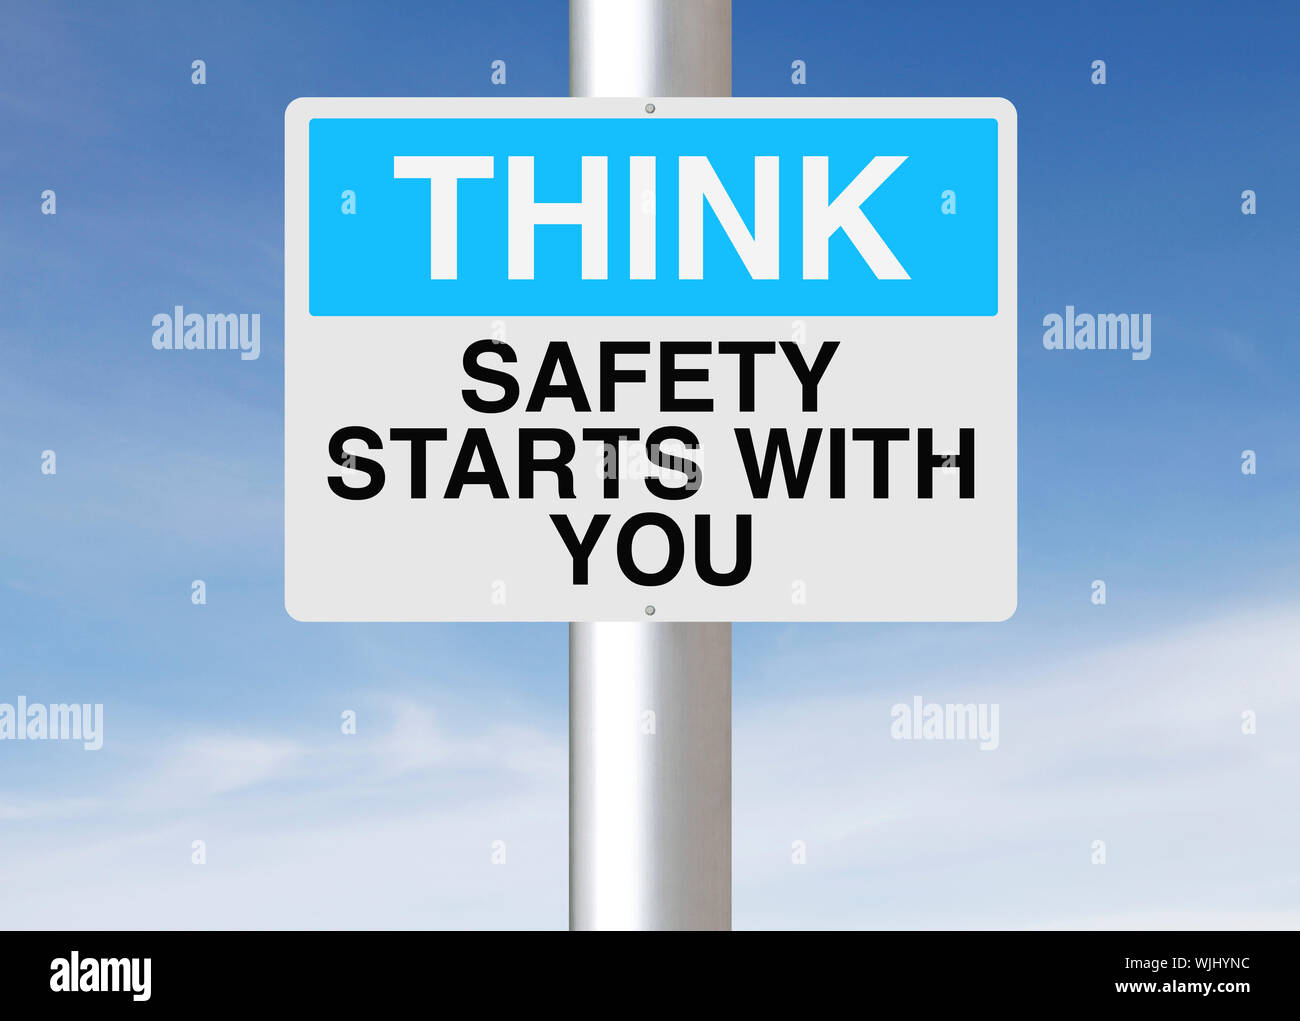 Safety Starts With You Stock Photo